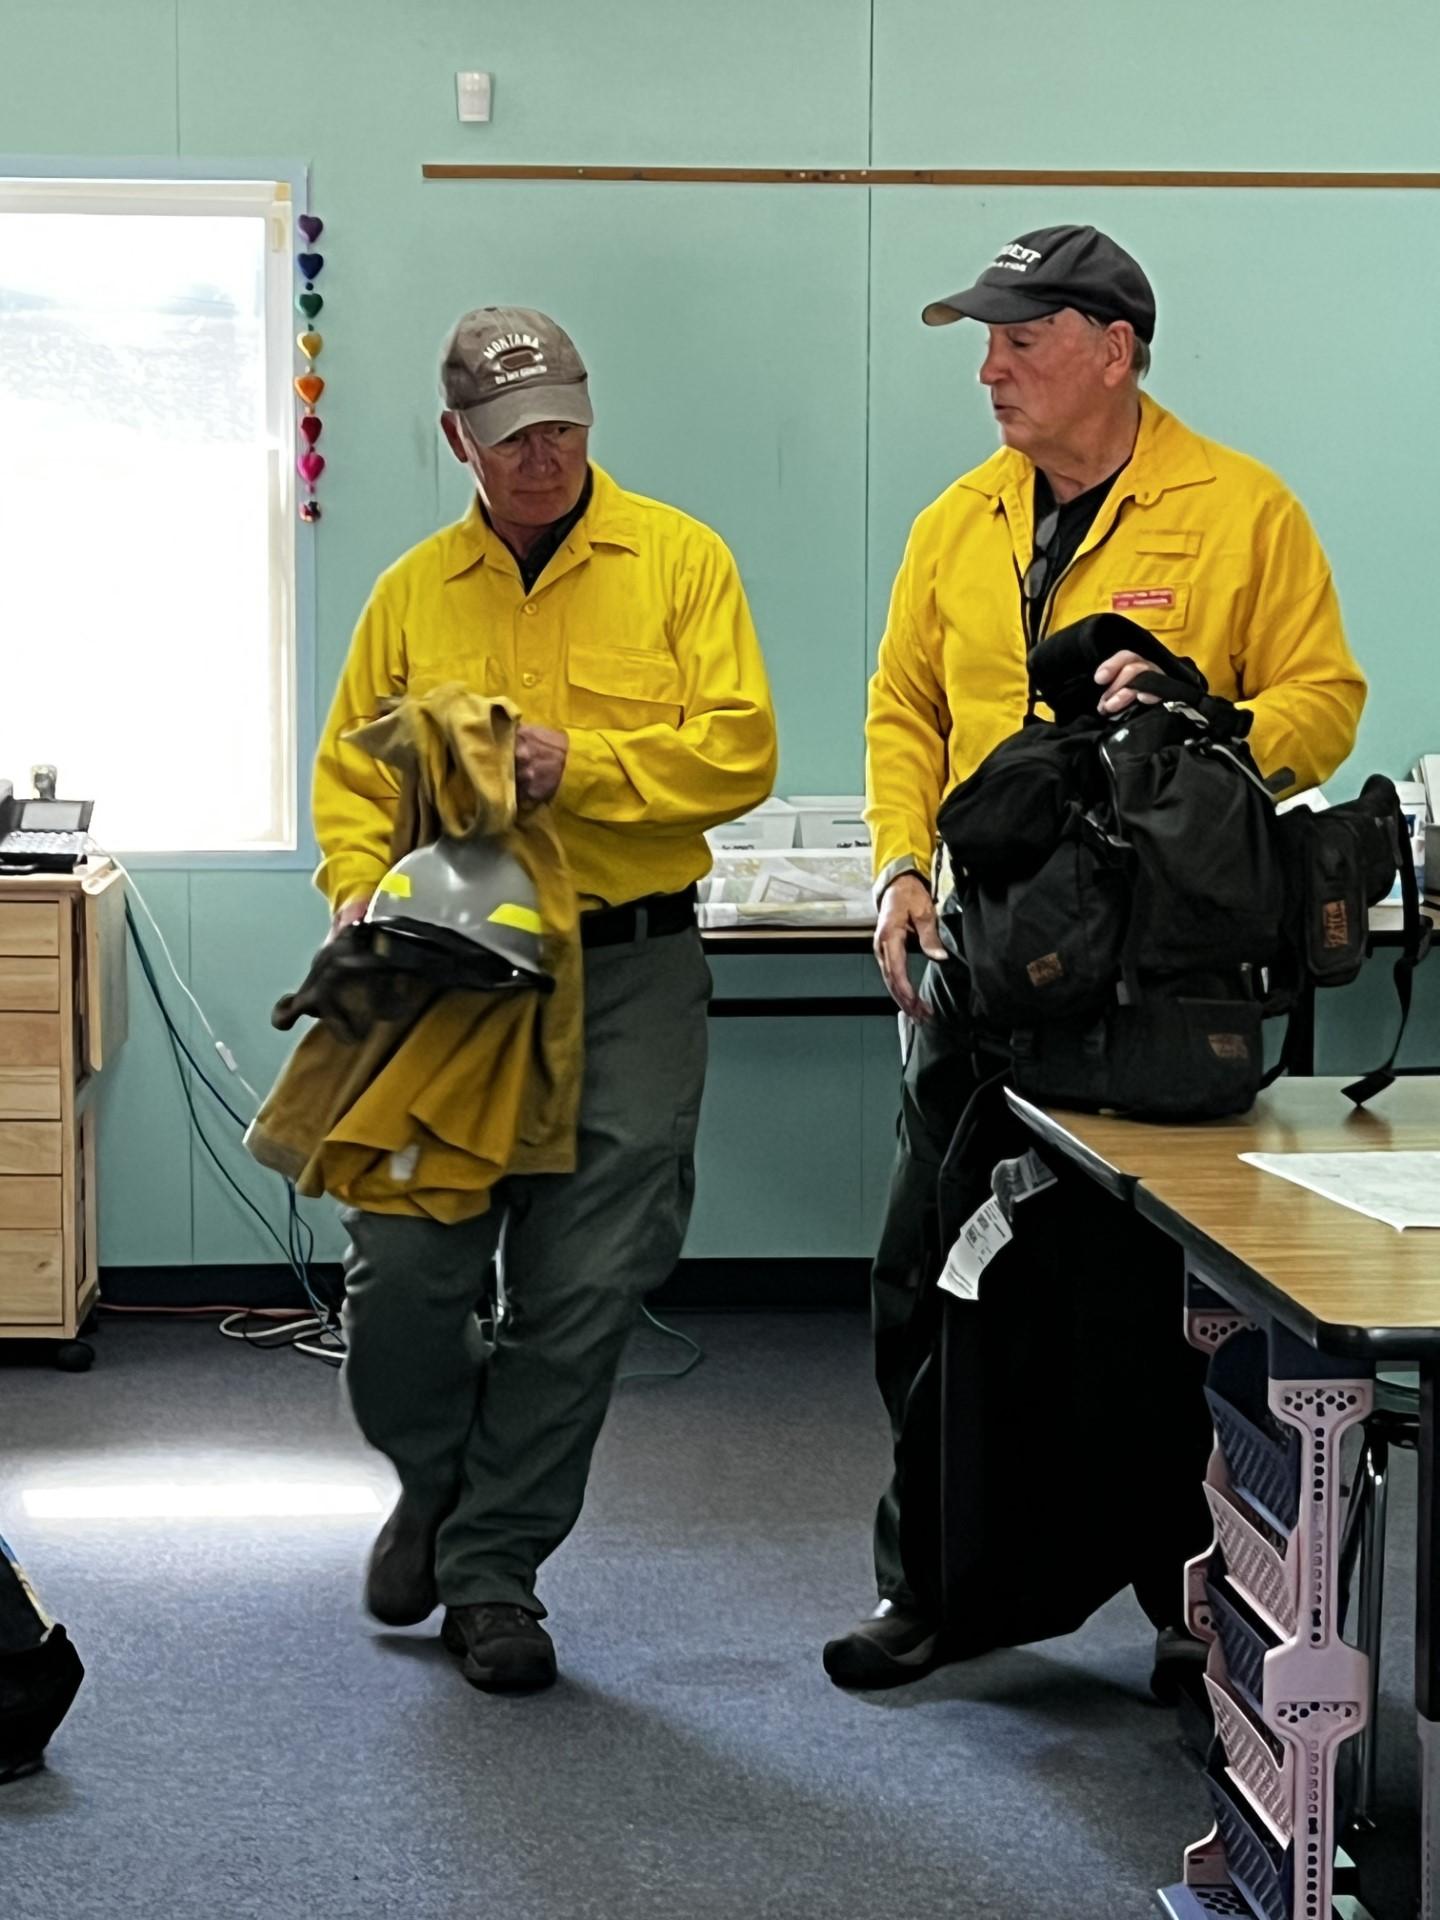 Two PIOs hold fireline equipment in a classroom